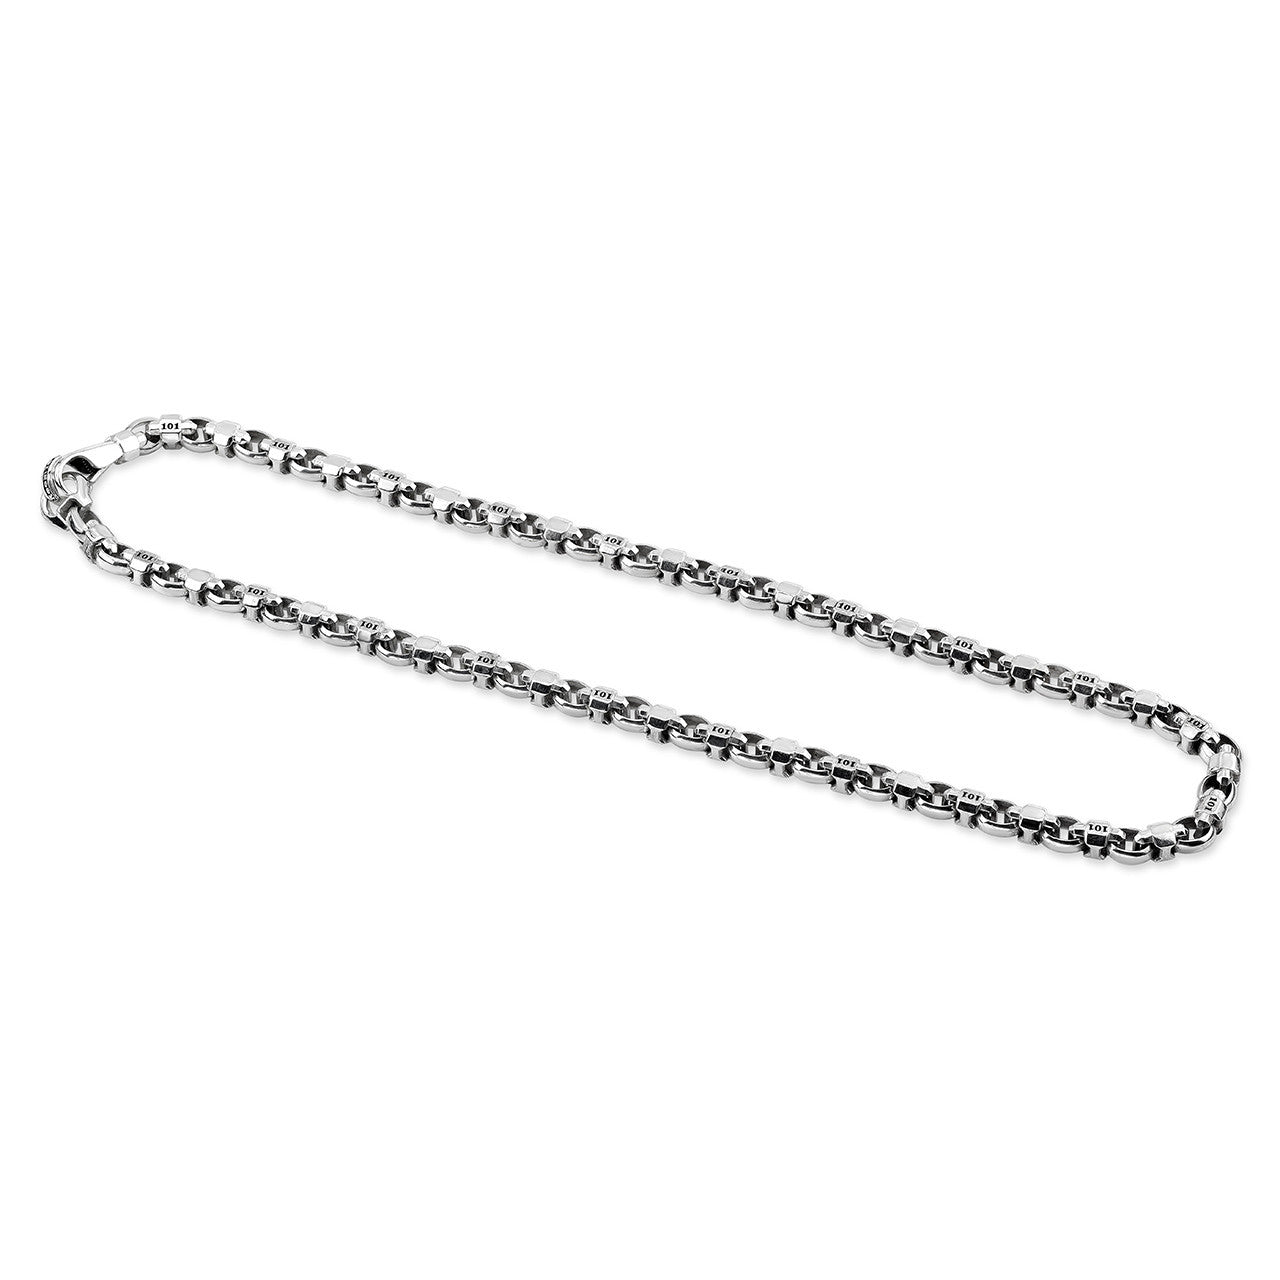 Caterpillar Channel Link Necklace